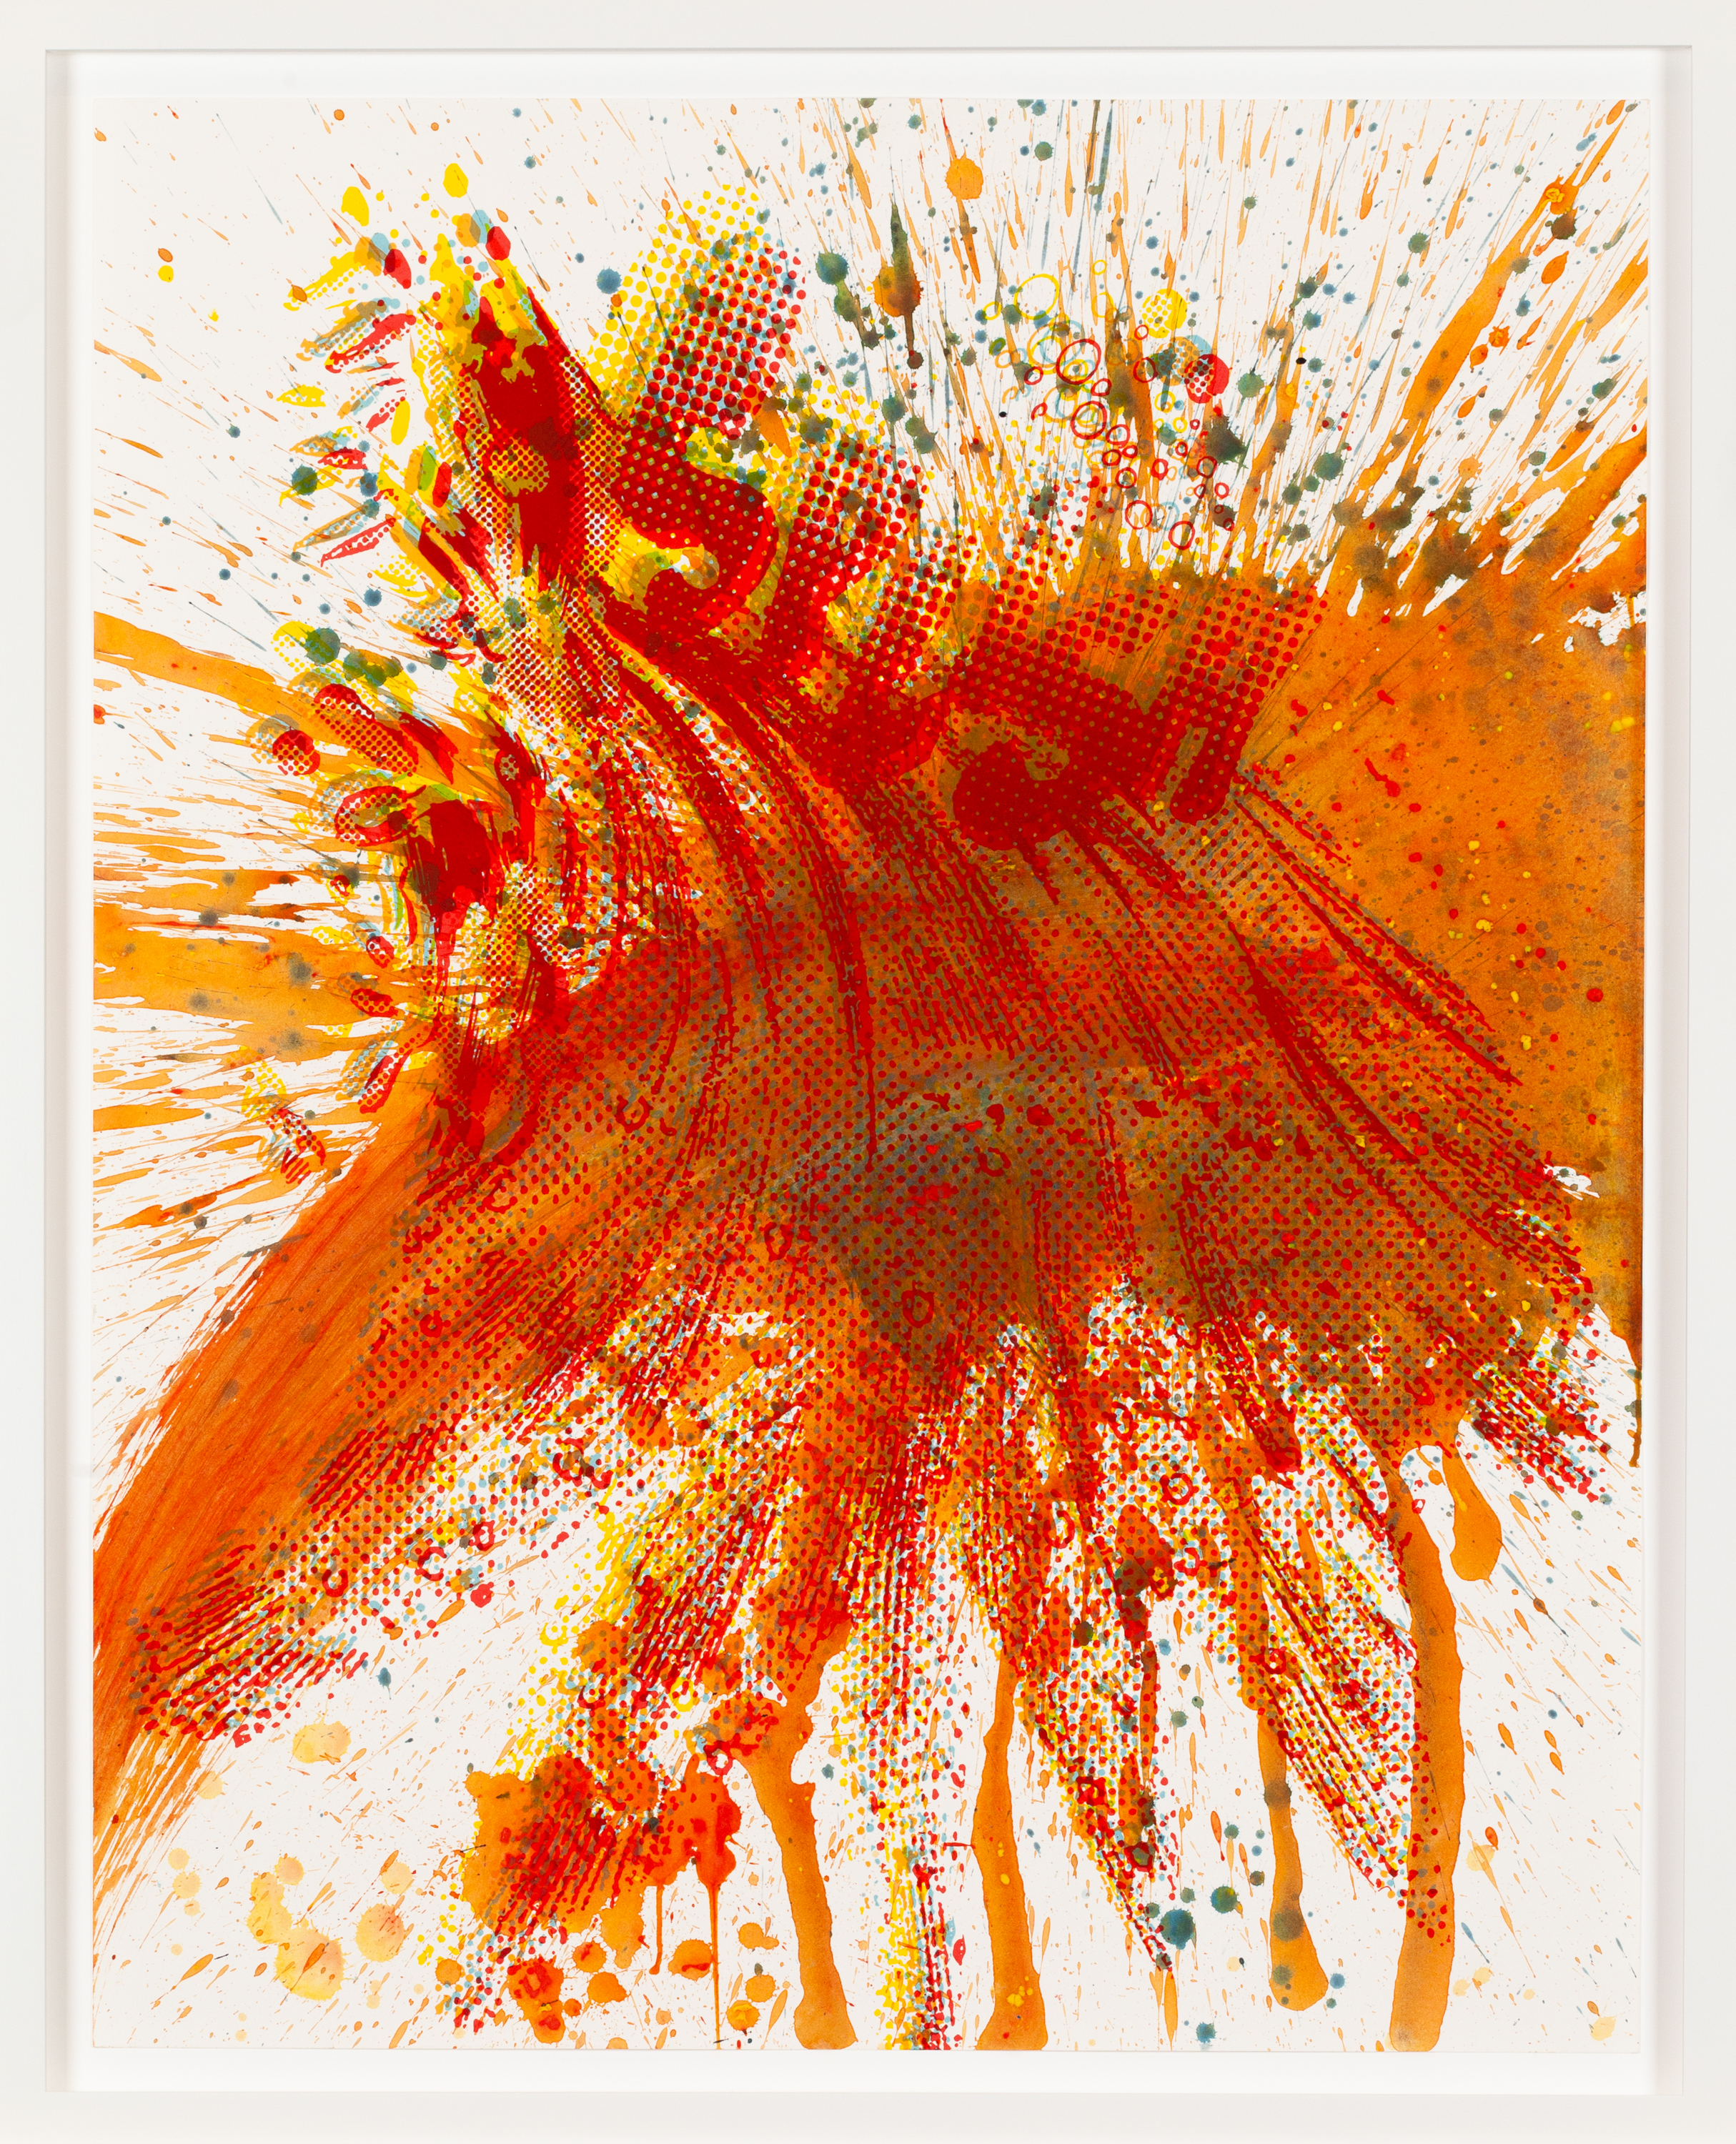 Color image of a color screen print depicting an orange splash with red, yellow, and blue ink on white framed in white